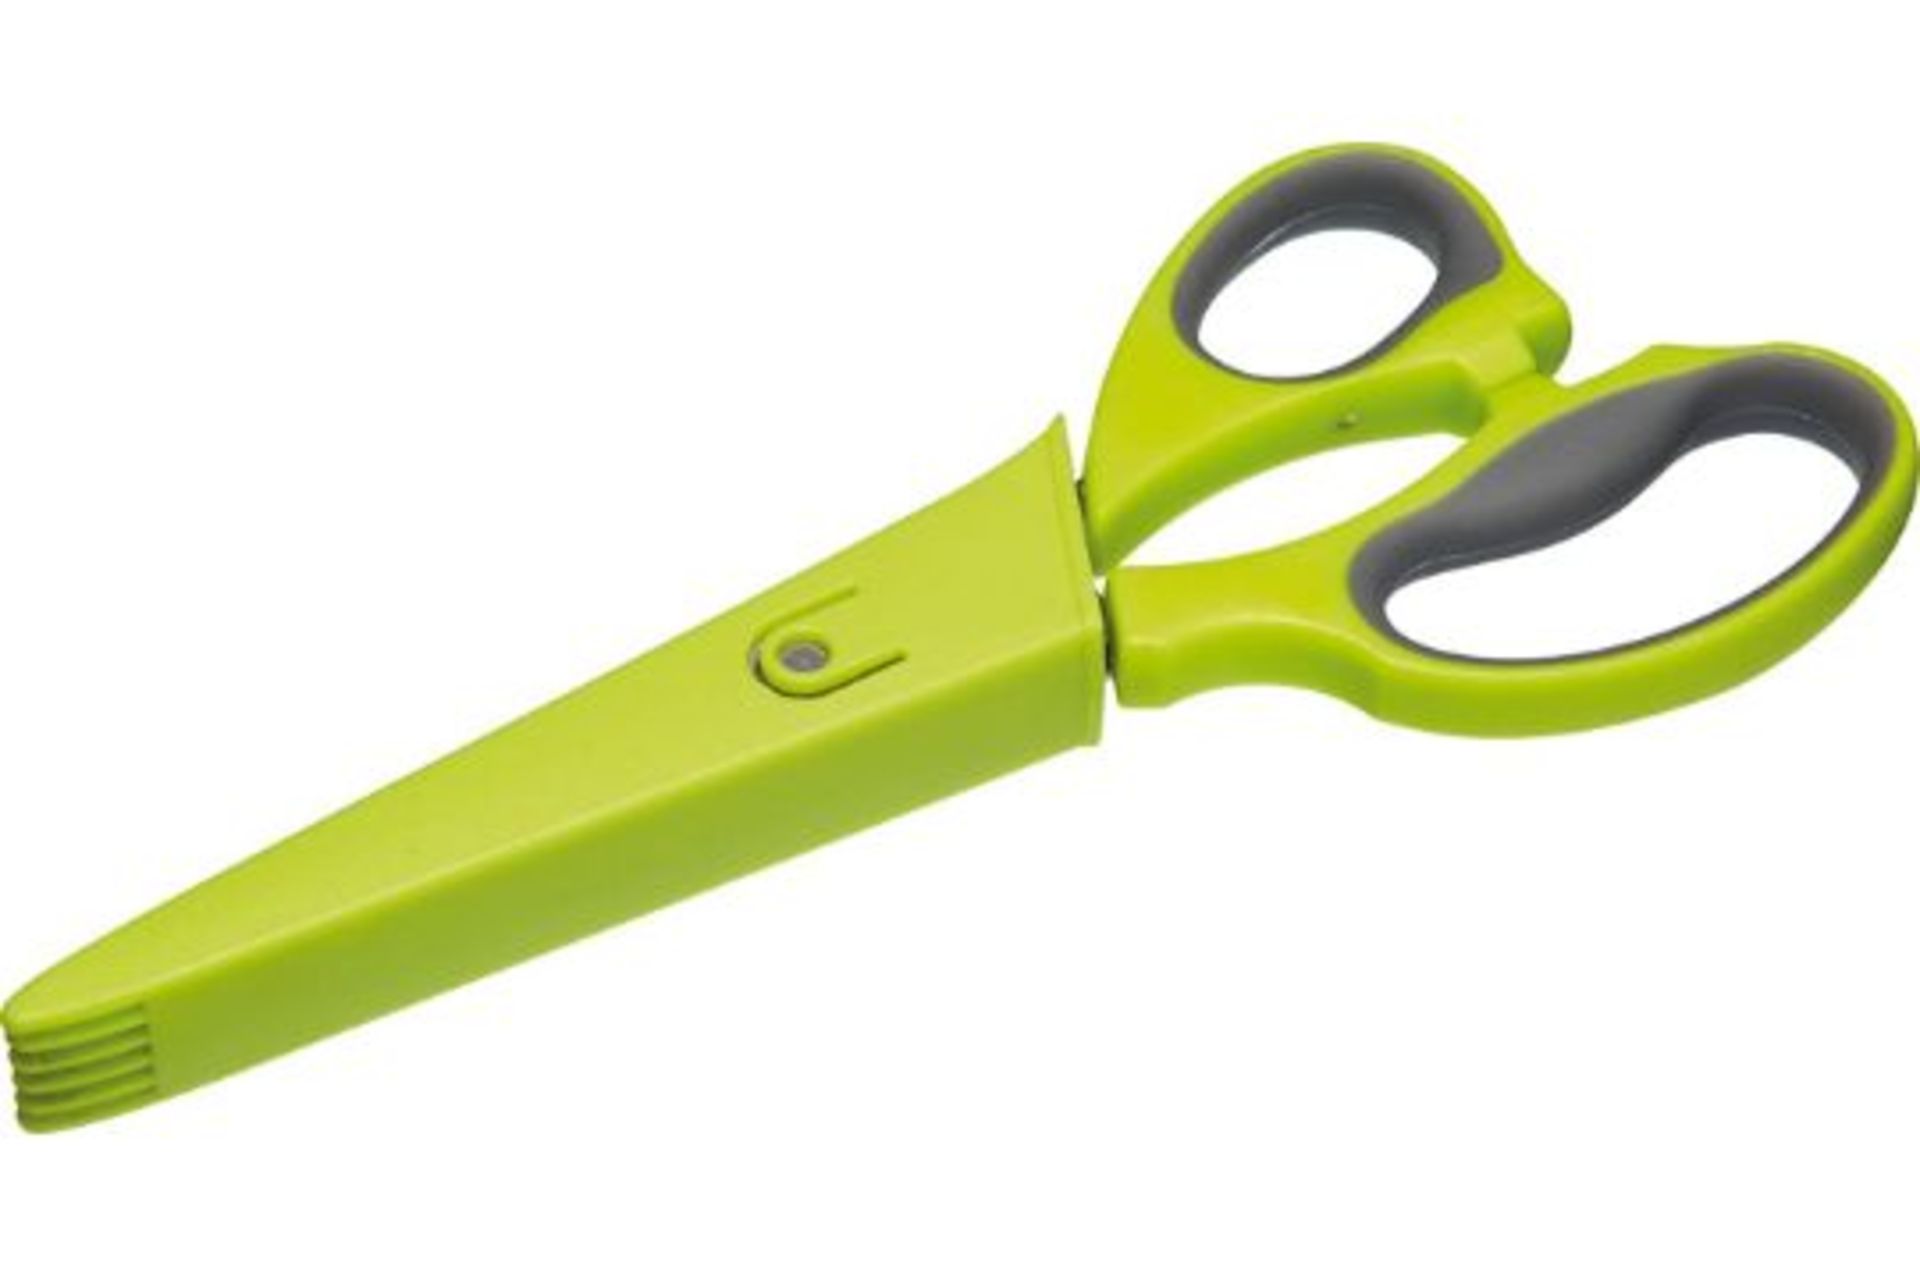 X2 BRAND NEW GARDEN CHEF HERB SCISSORS AND CASE - RRP £7.49 EACH - Image 2 of 2